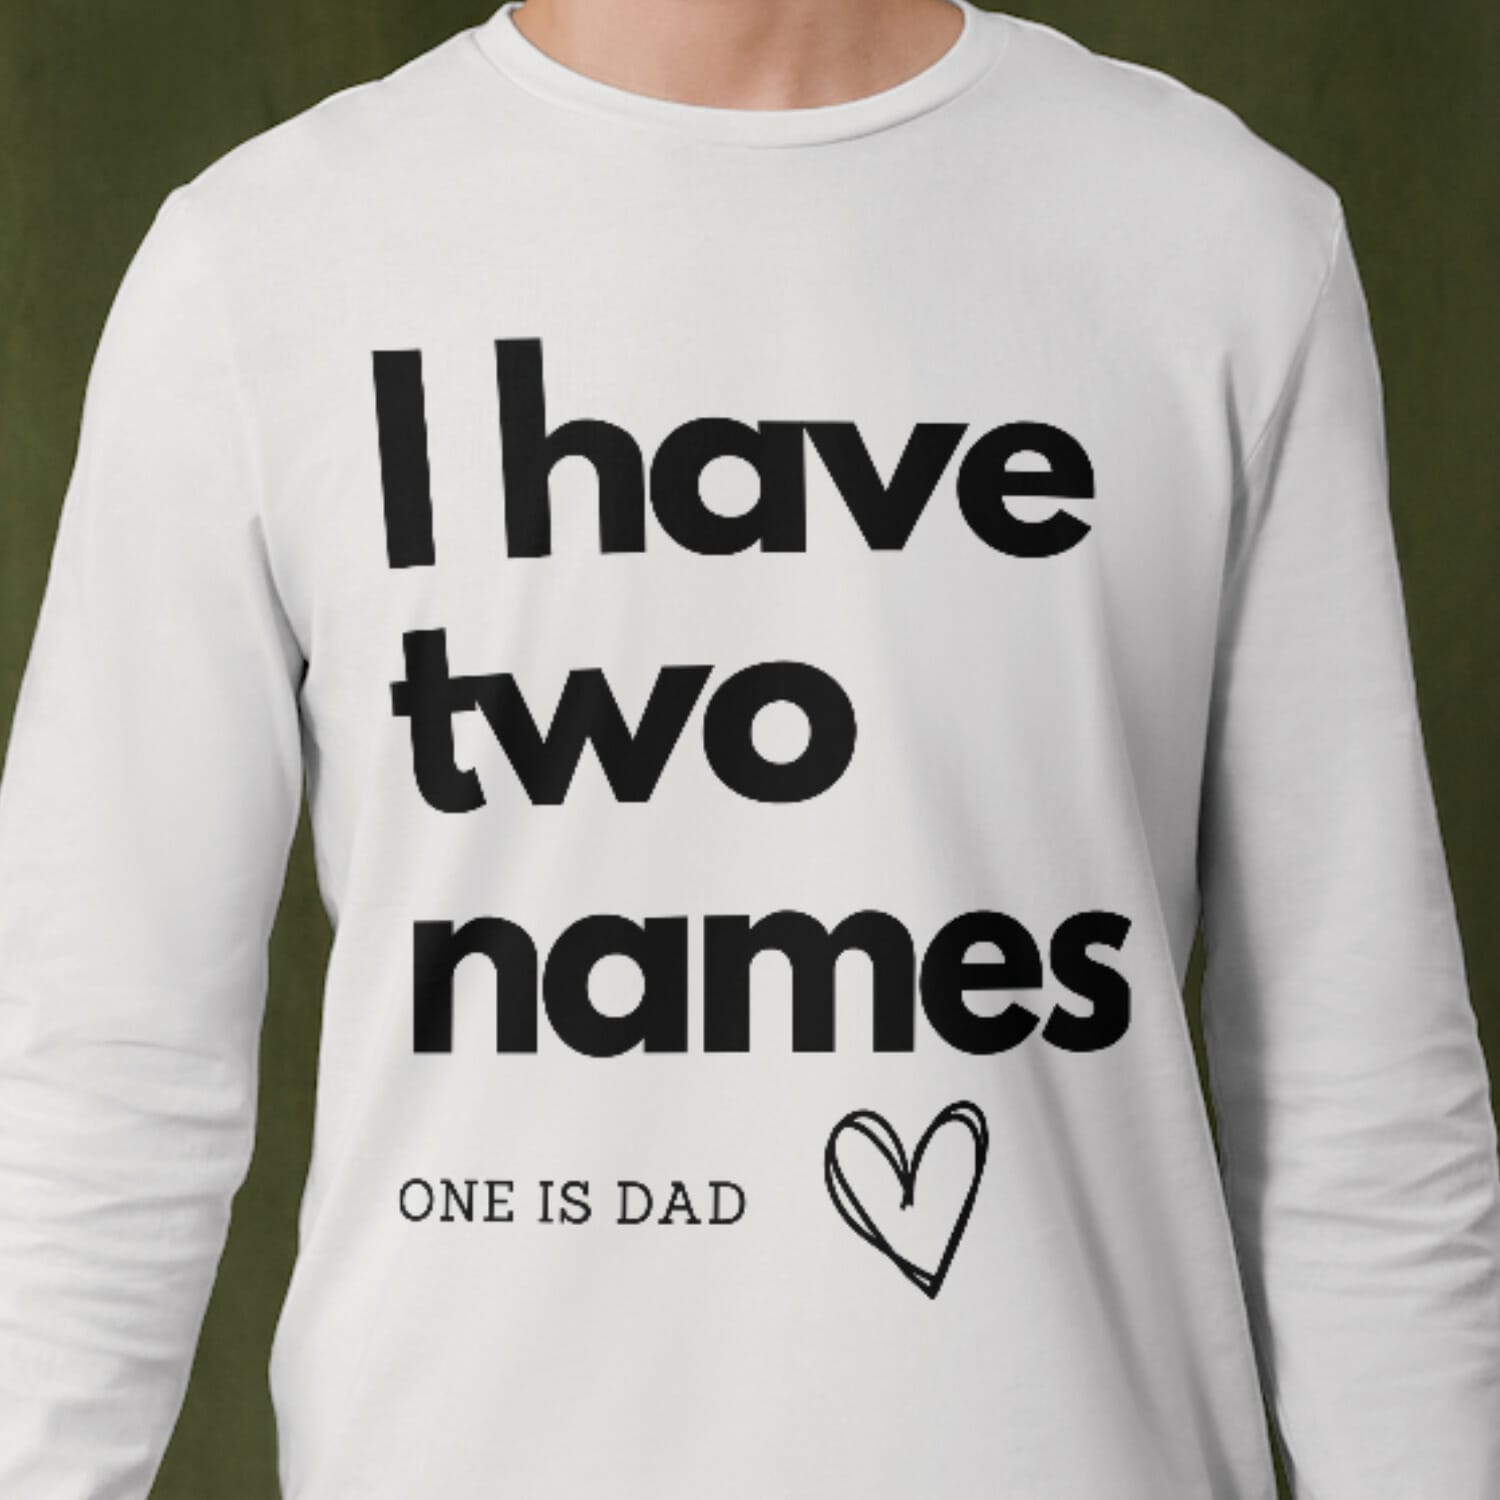 I have two names one is dad Tshirt design